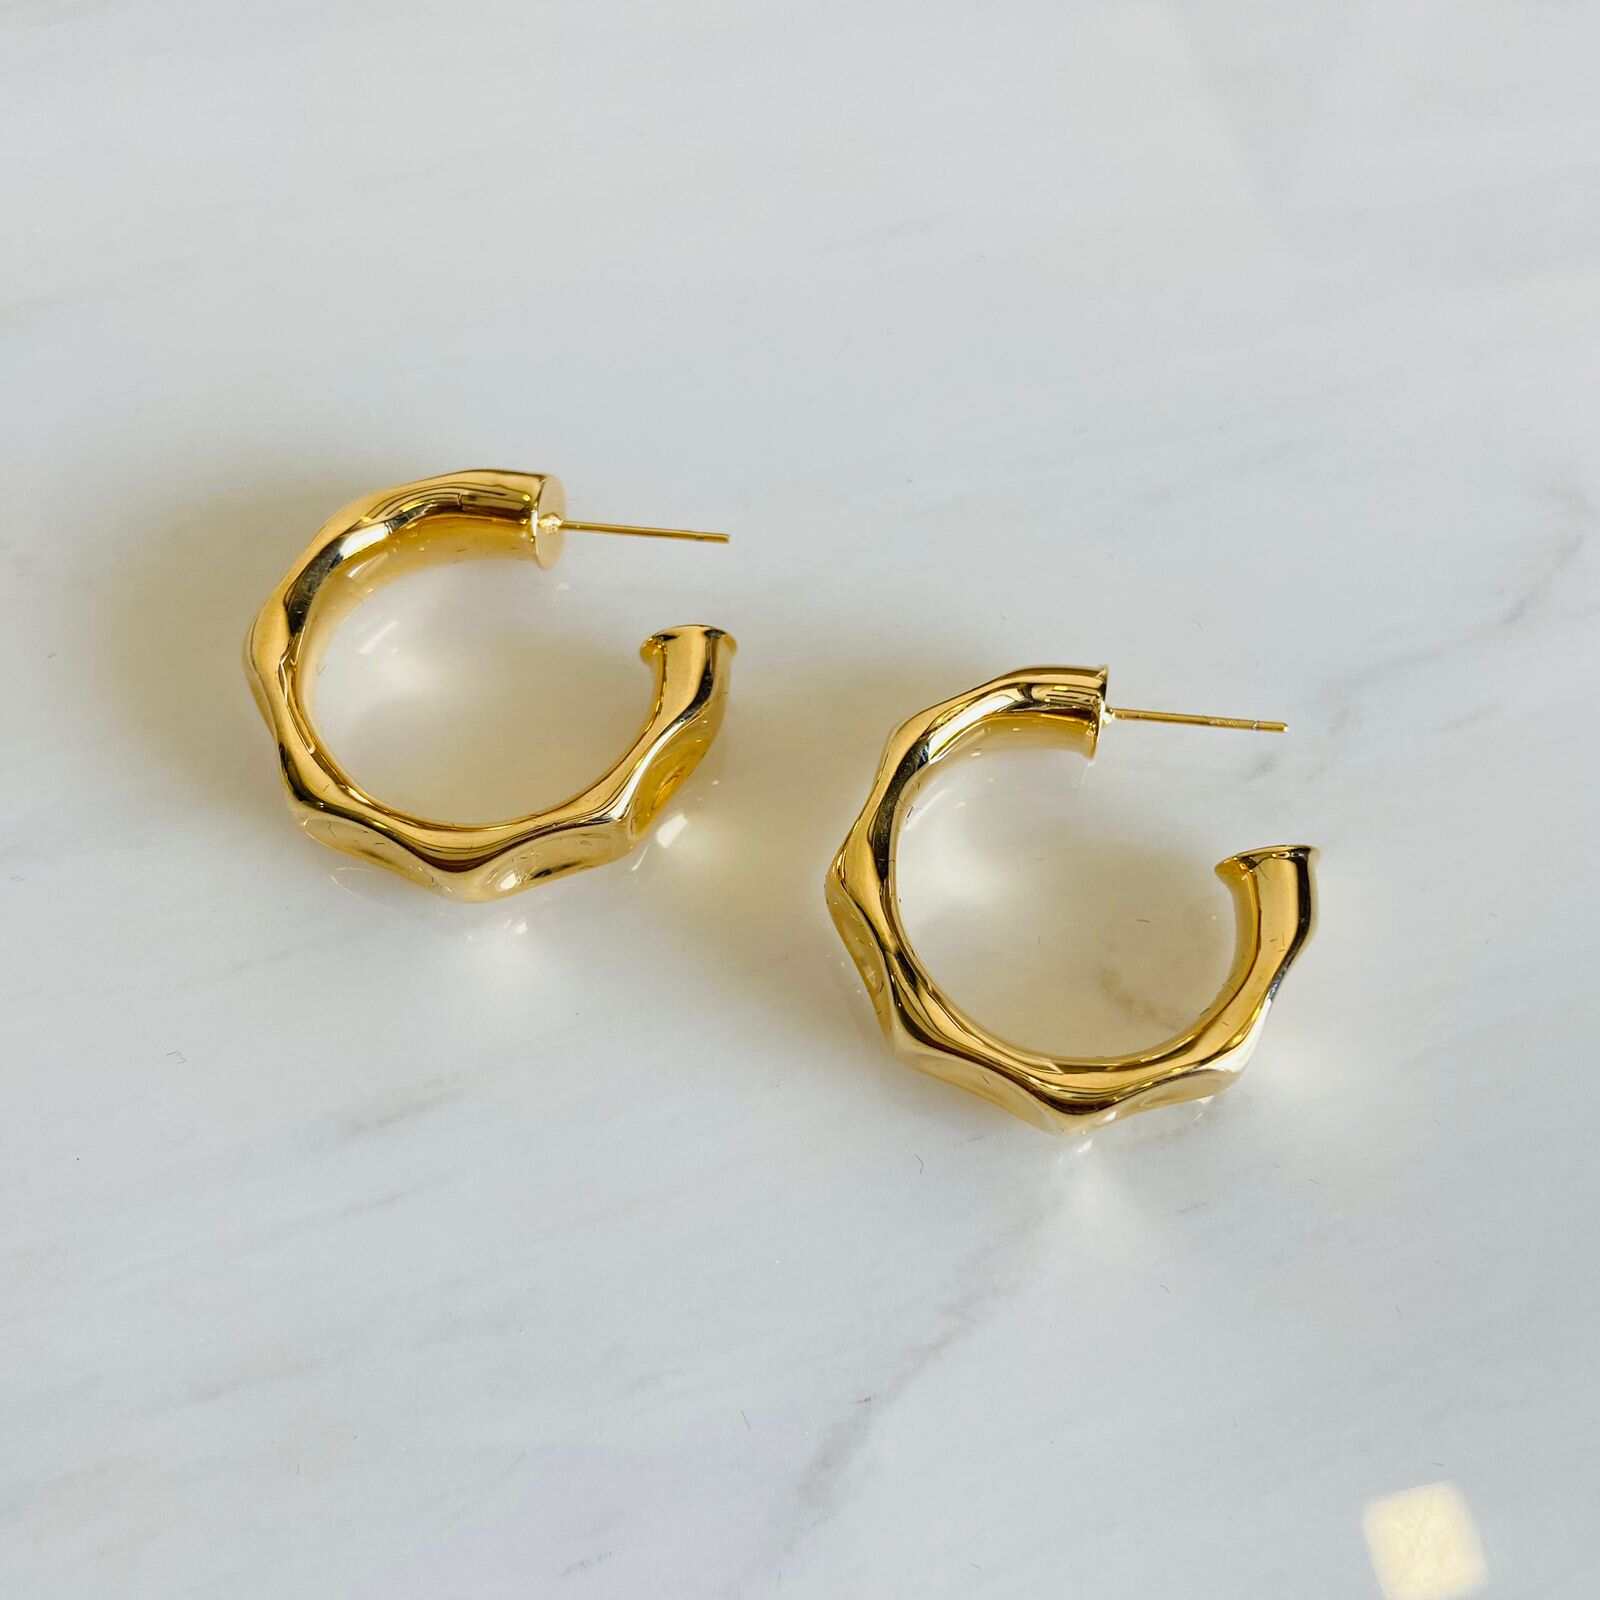 Trending Earring Styles: Oversized and Unique Earrings - King Jewelers